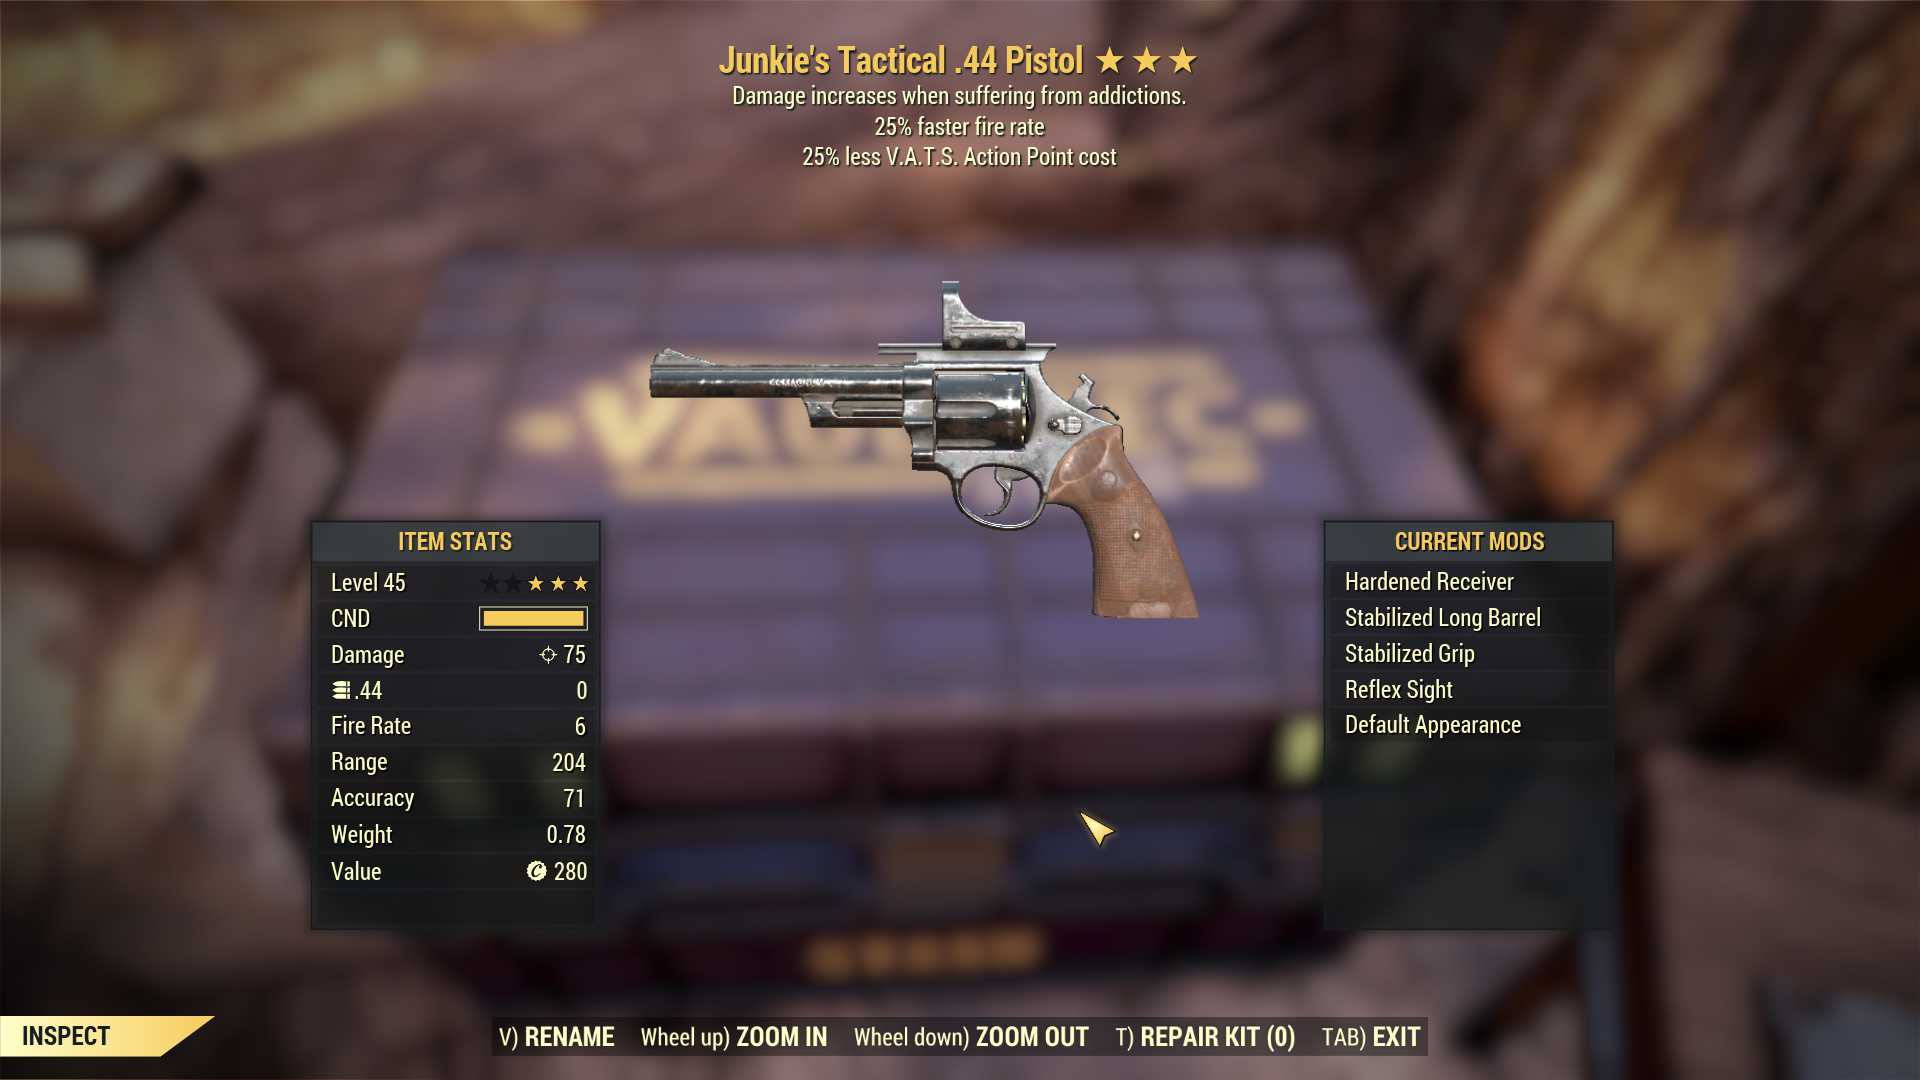 Junkie's .44 Pistol (25% faster fire rate, 25% less VATS AP cost)